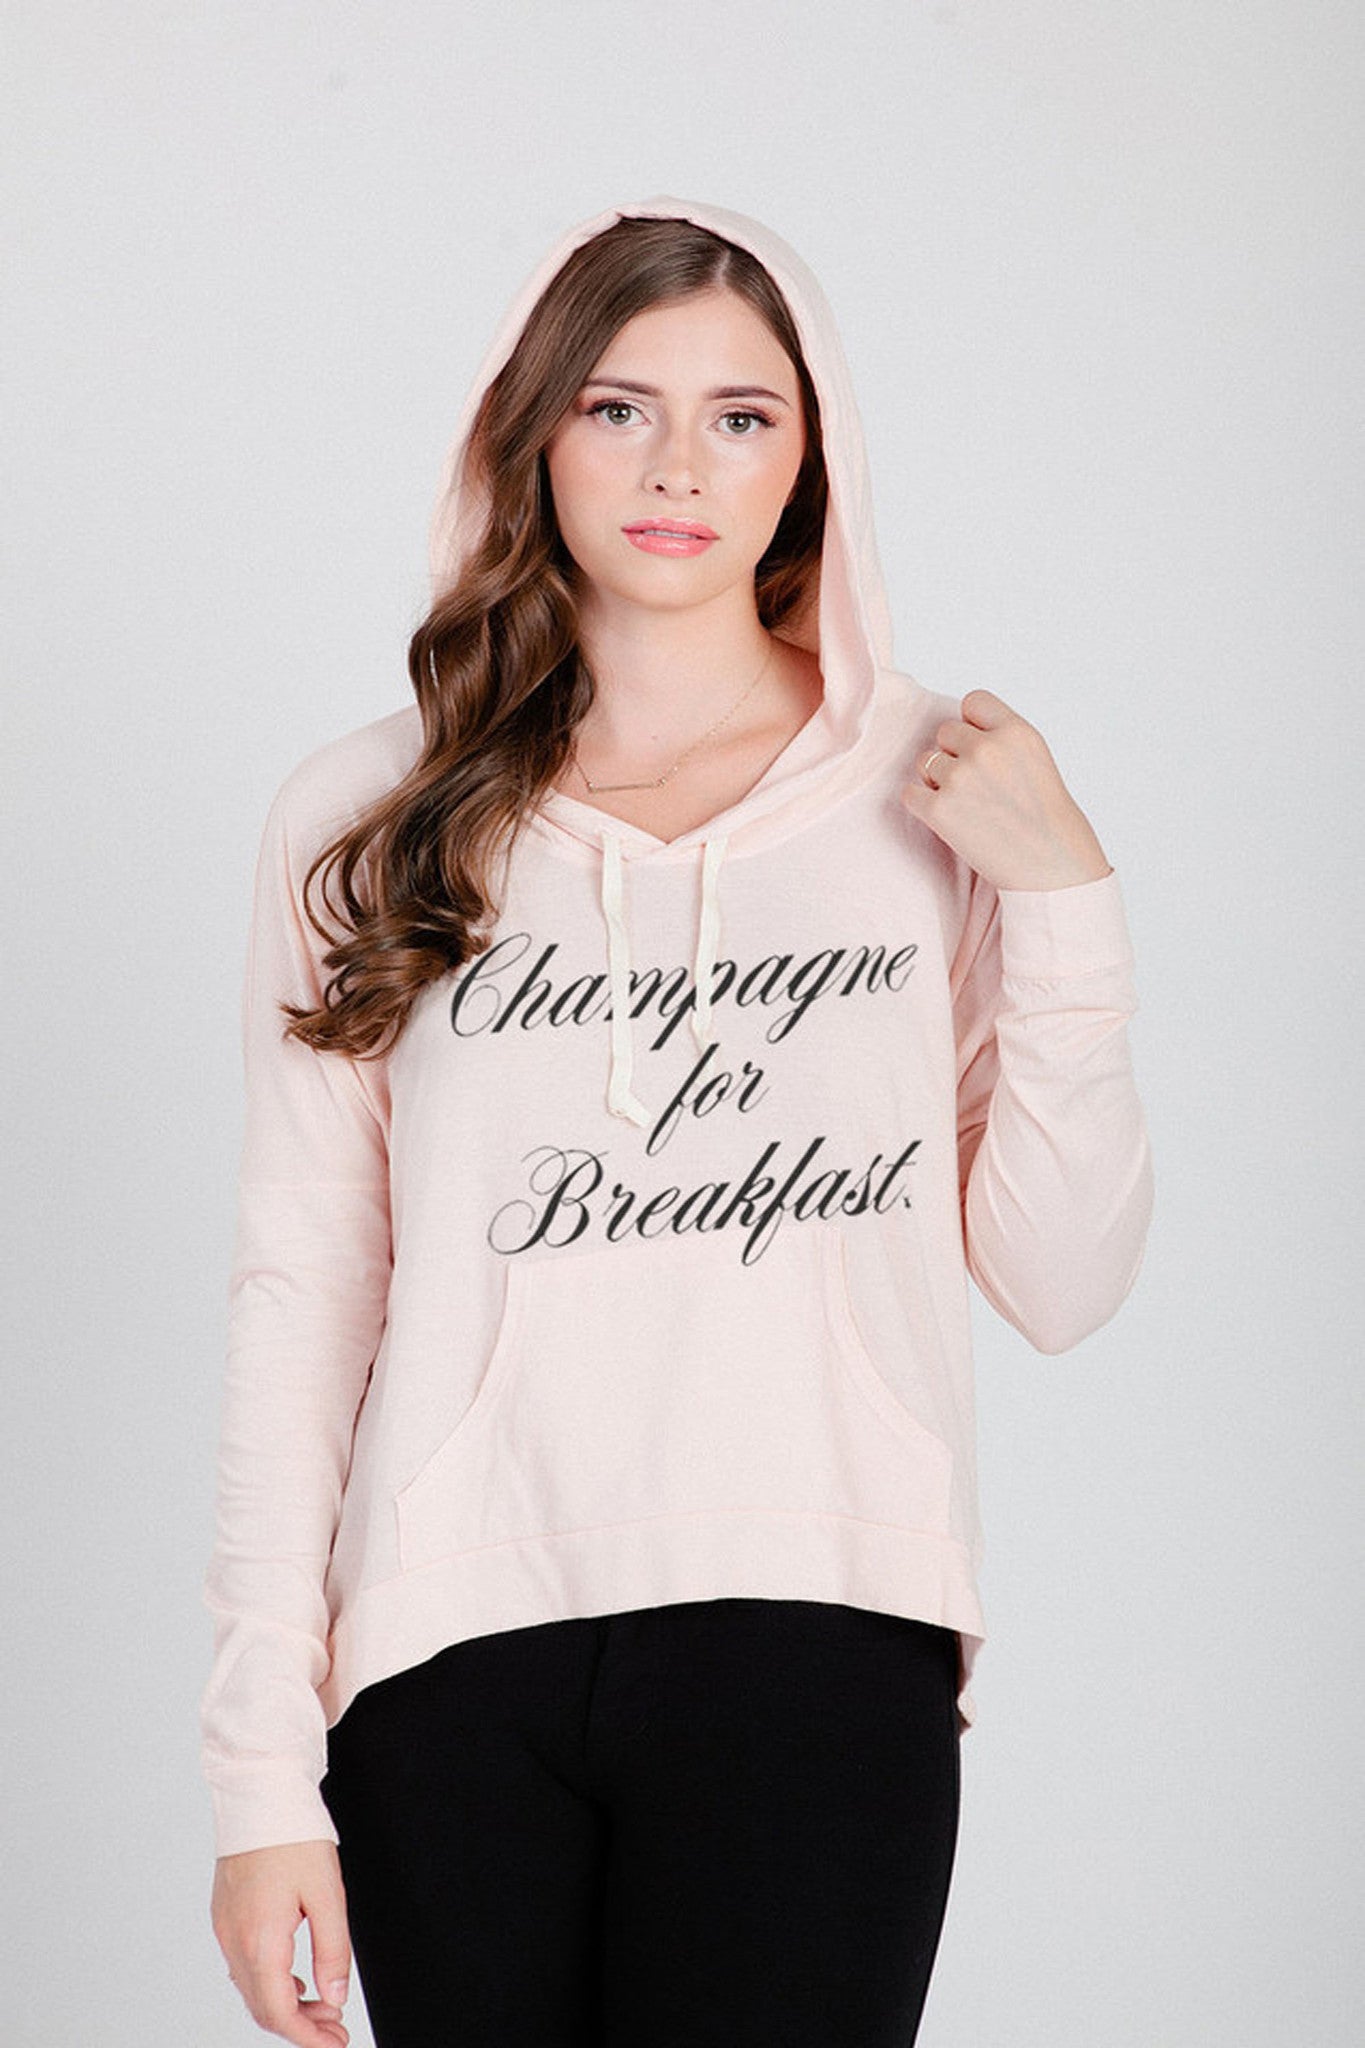 Royal Rabbit Champagne for Breakfast Sweater - OUTERWEAR - ROYAL RABBIT - Free Vibrationz - 3